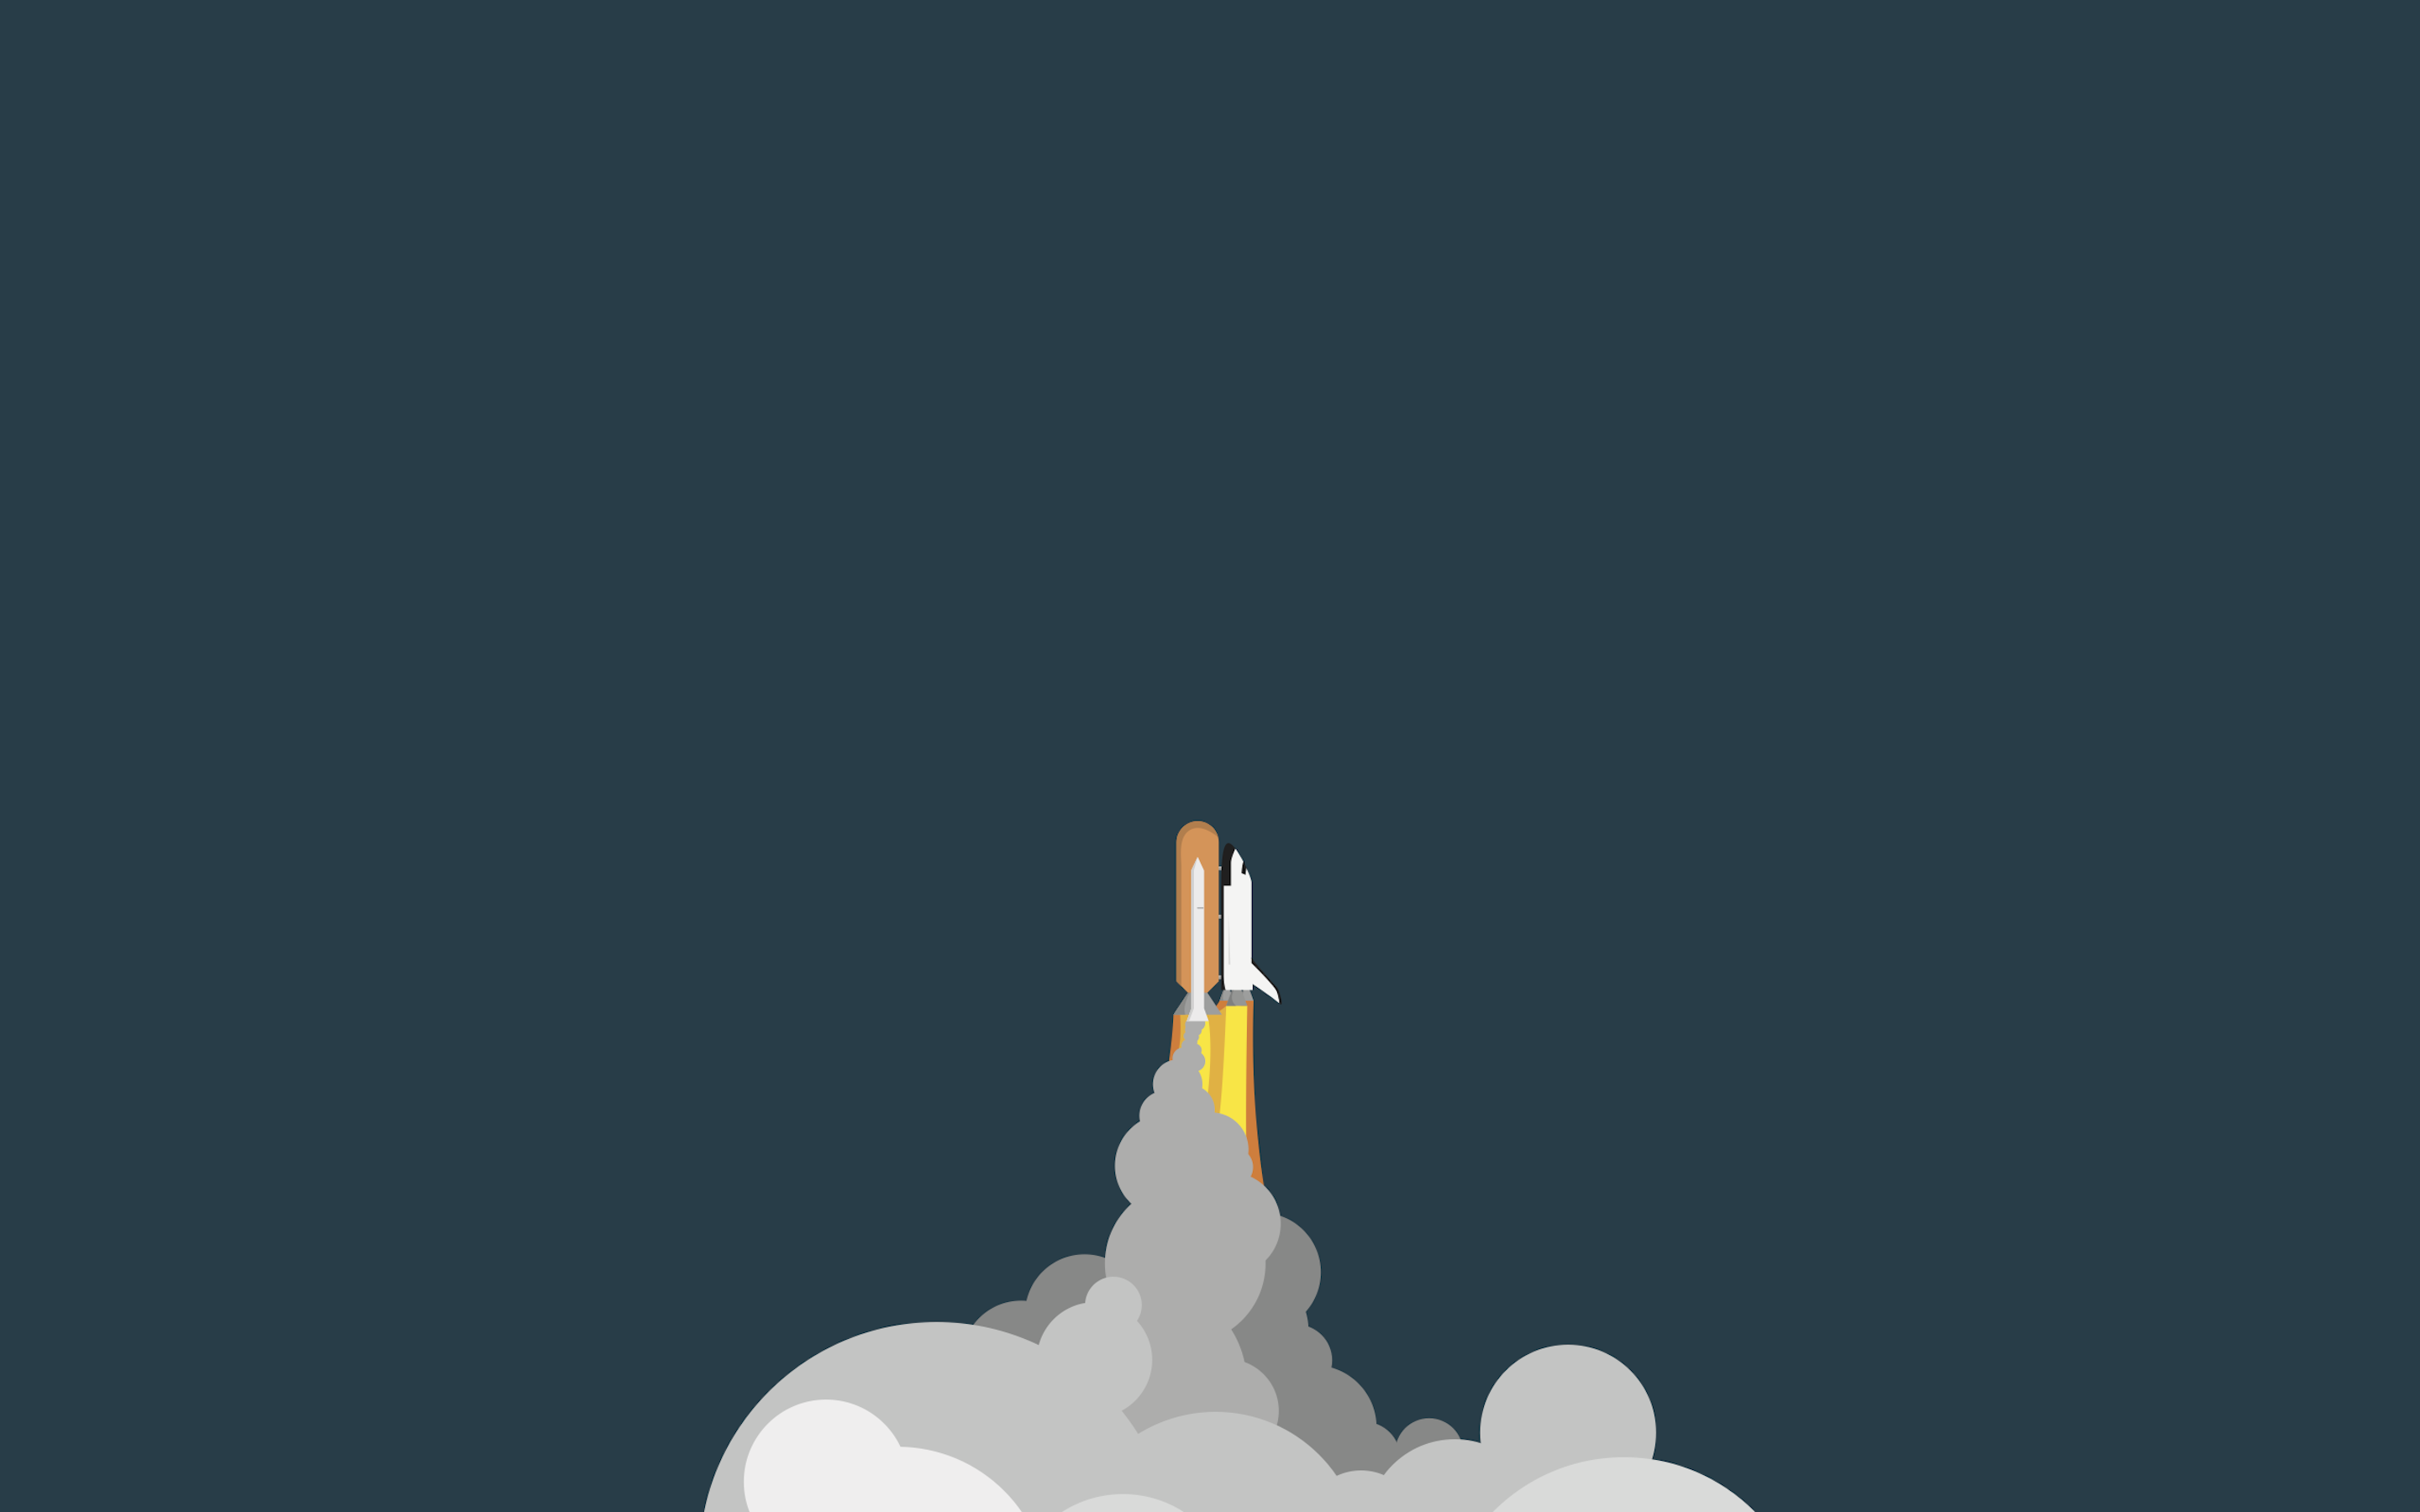 Classical Simple Wallpaper Rocket Image Smoke Picture